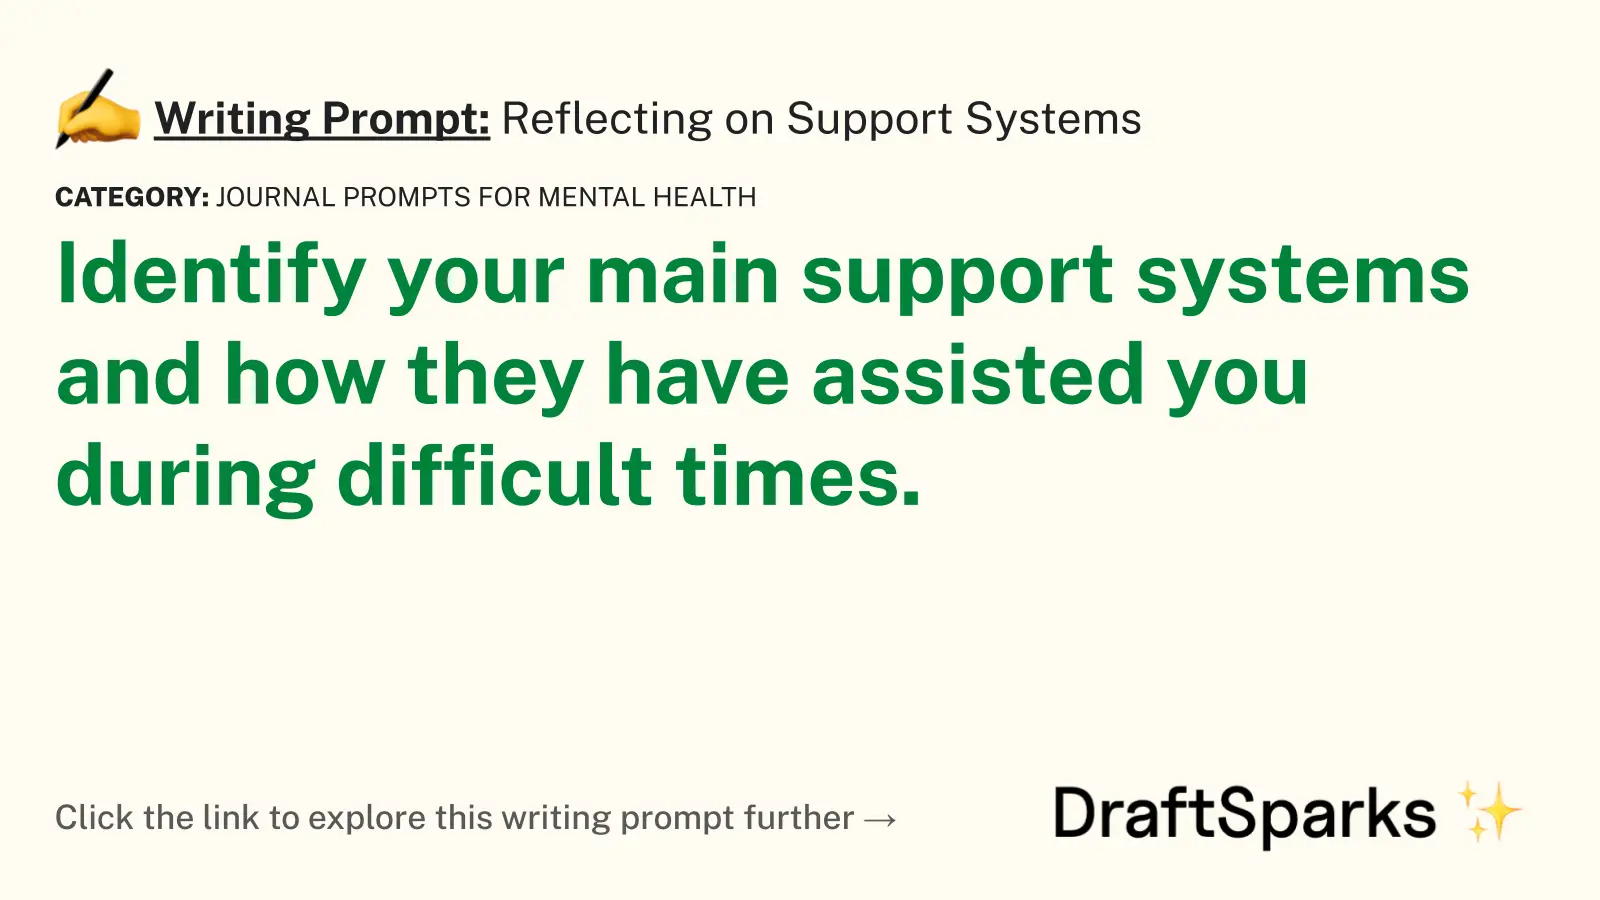 Reflecting on Support Systems